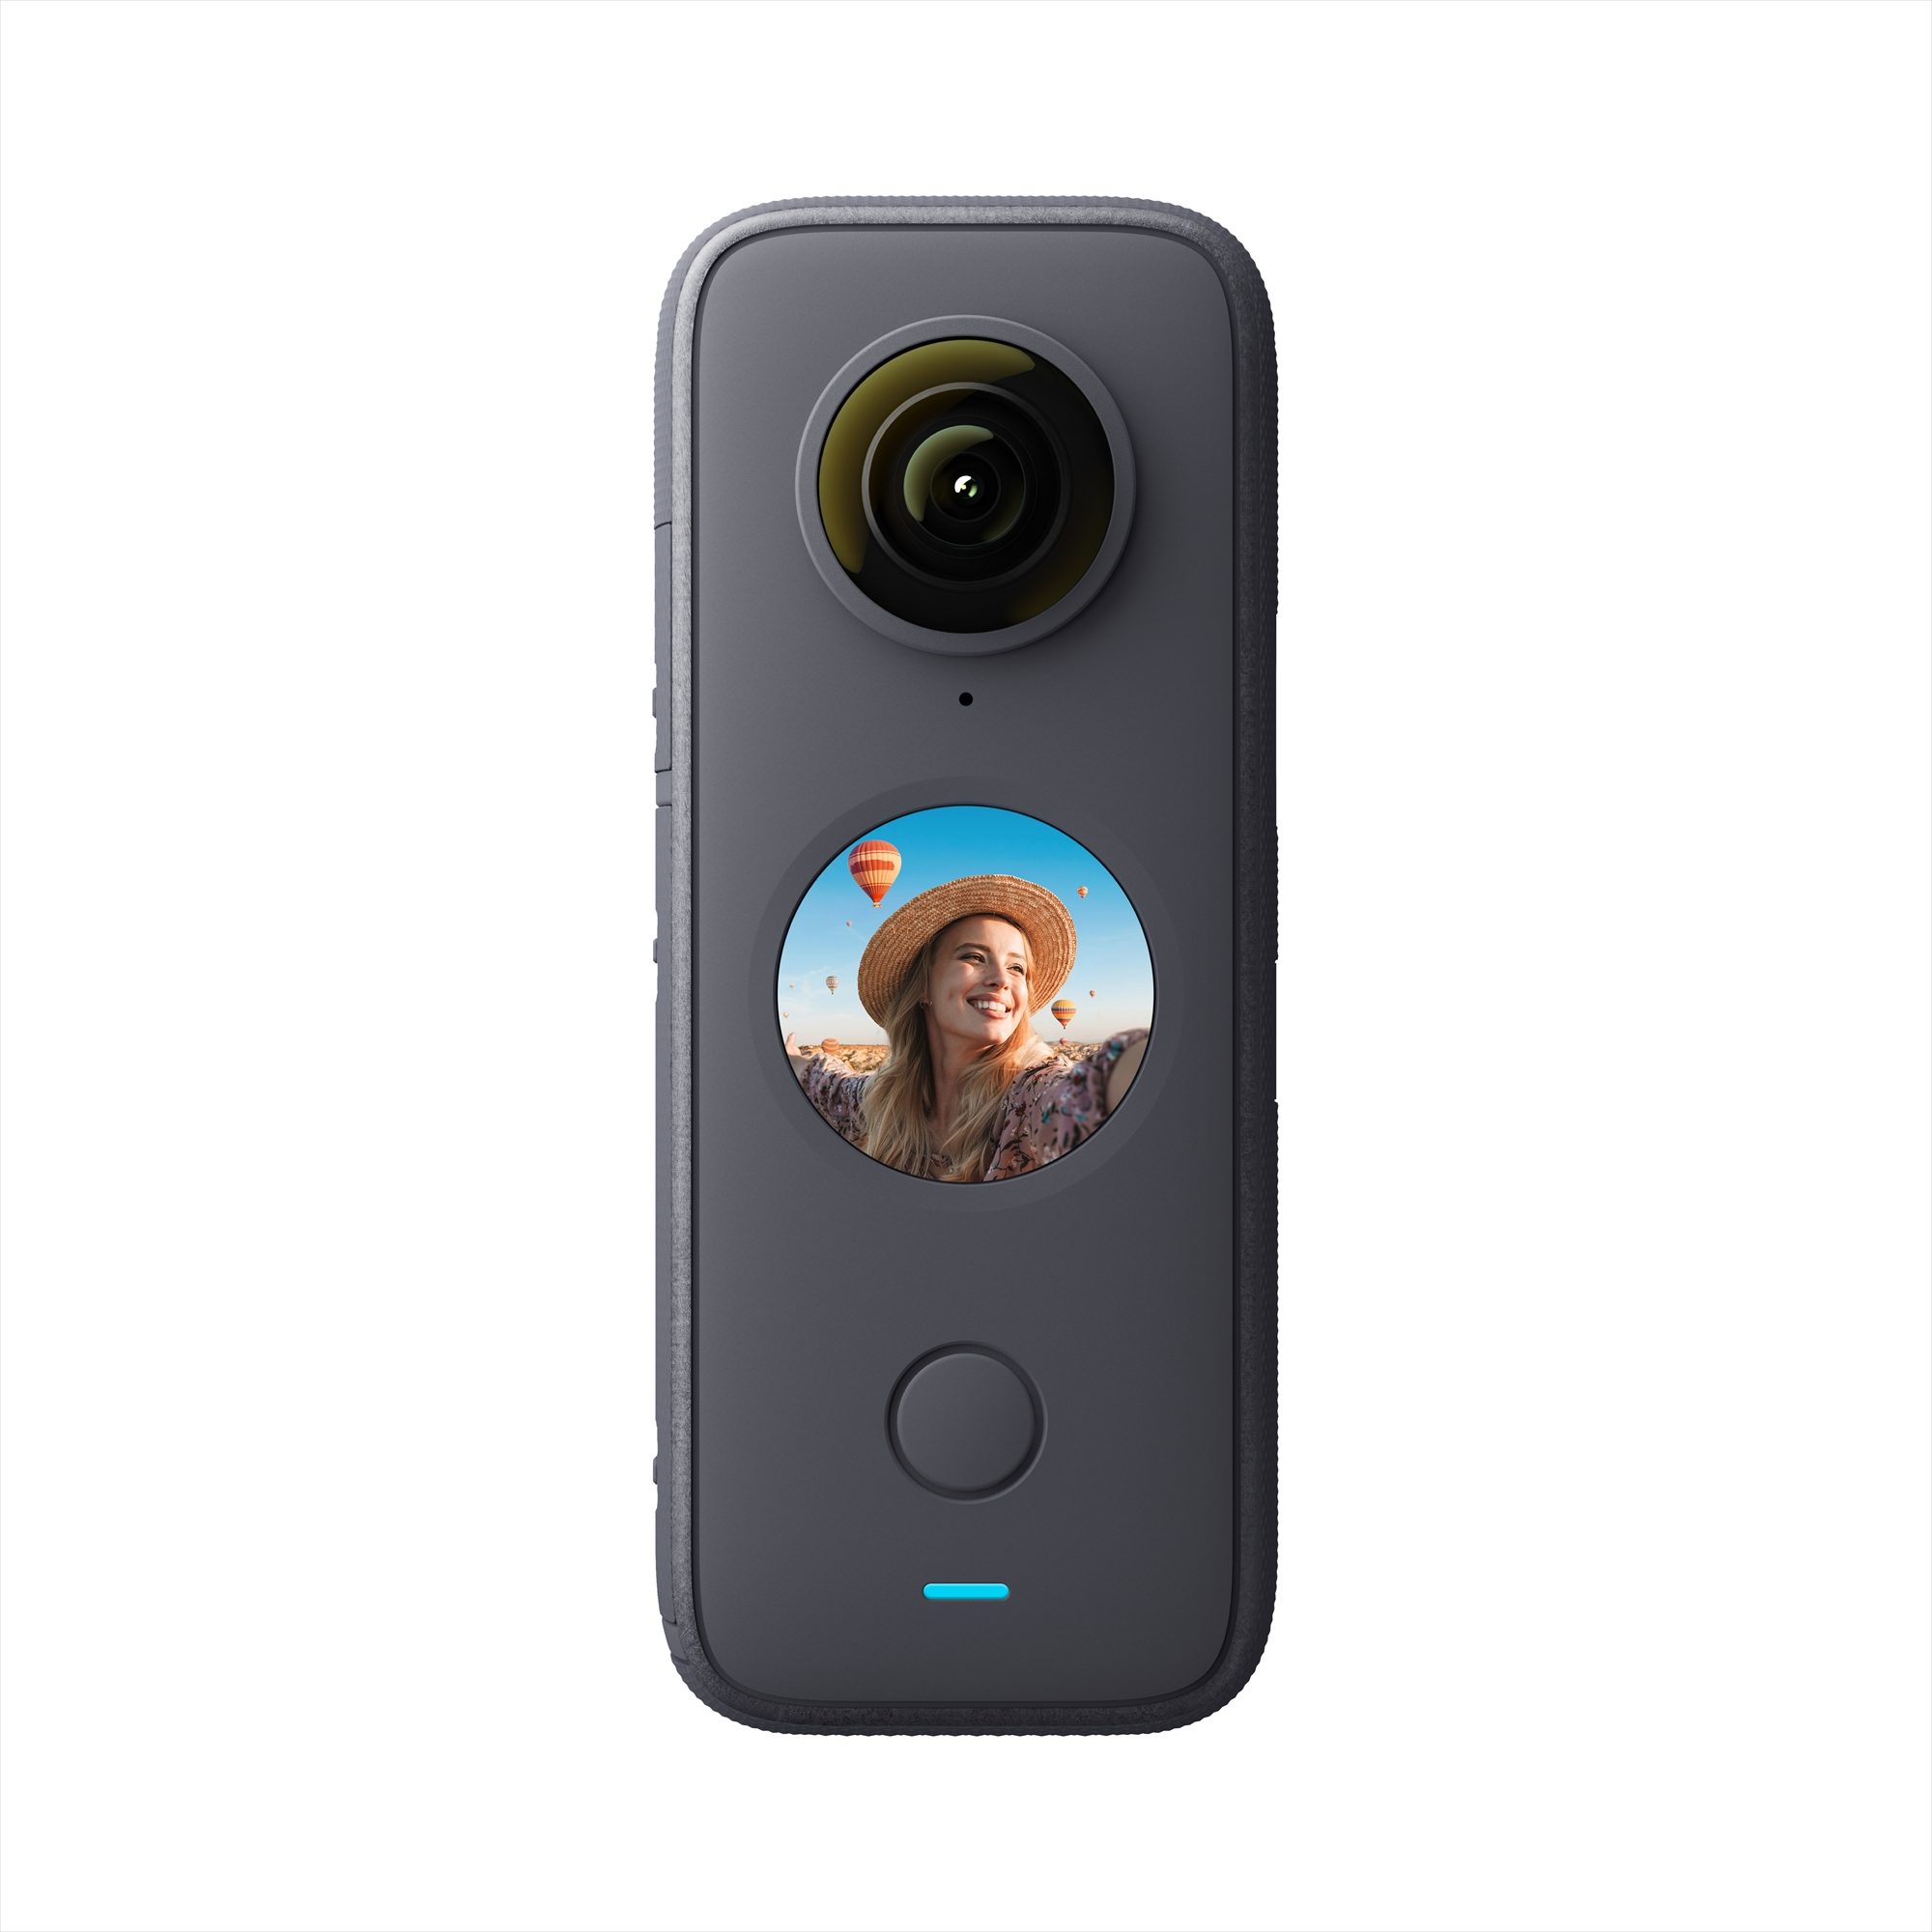 Insta360 X2 : Insta360 ONE X2 pocket camera features single-lens stable ... / Here in western washington, winter.